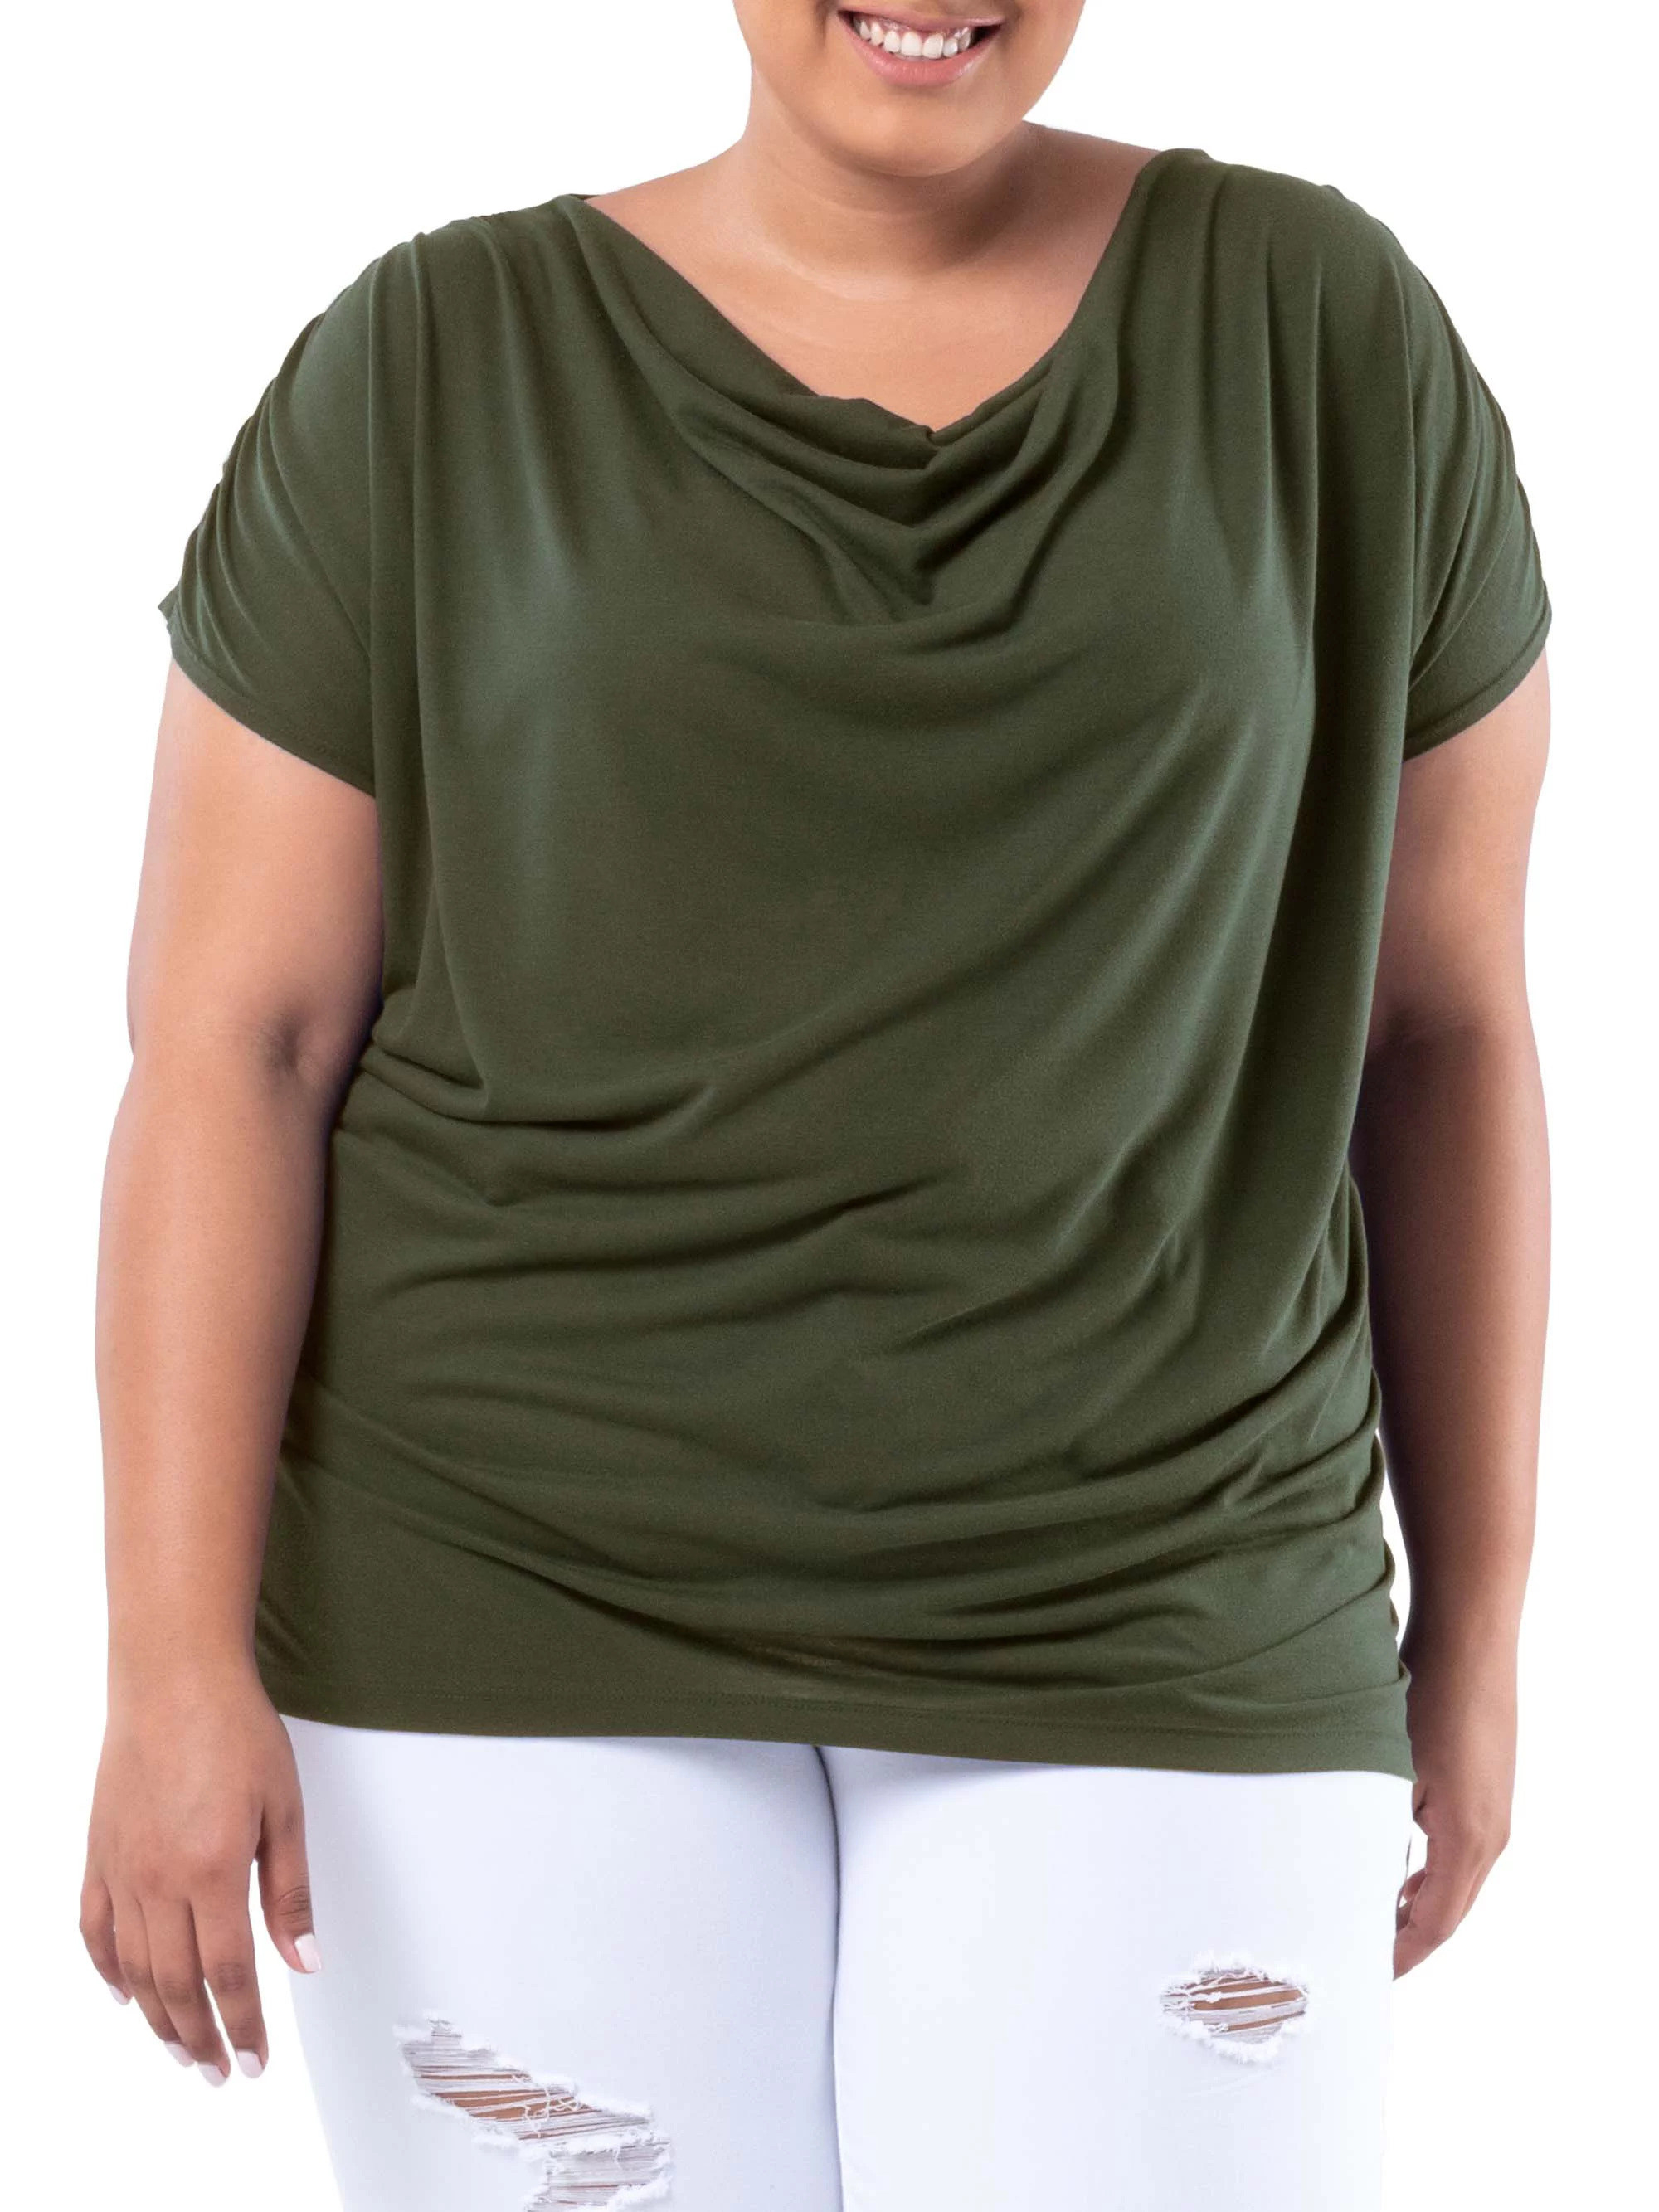 Model wearing the olive top